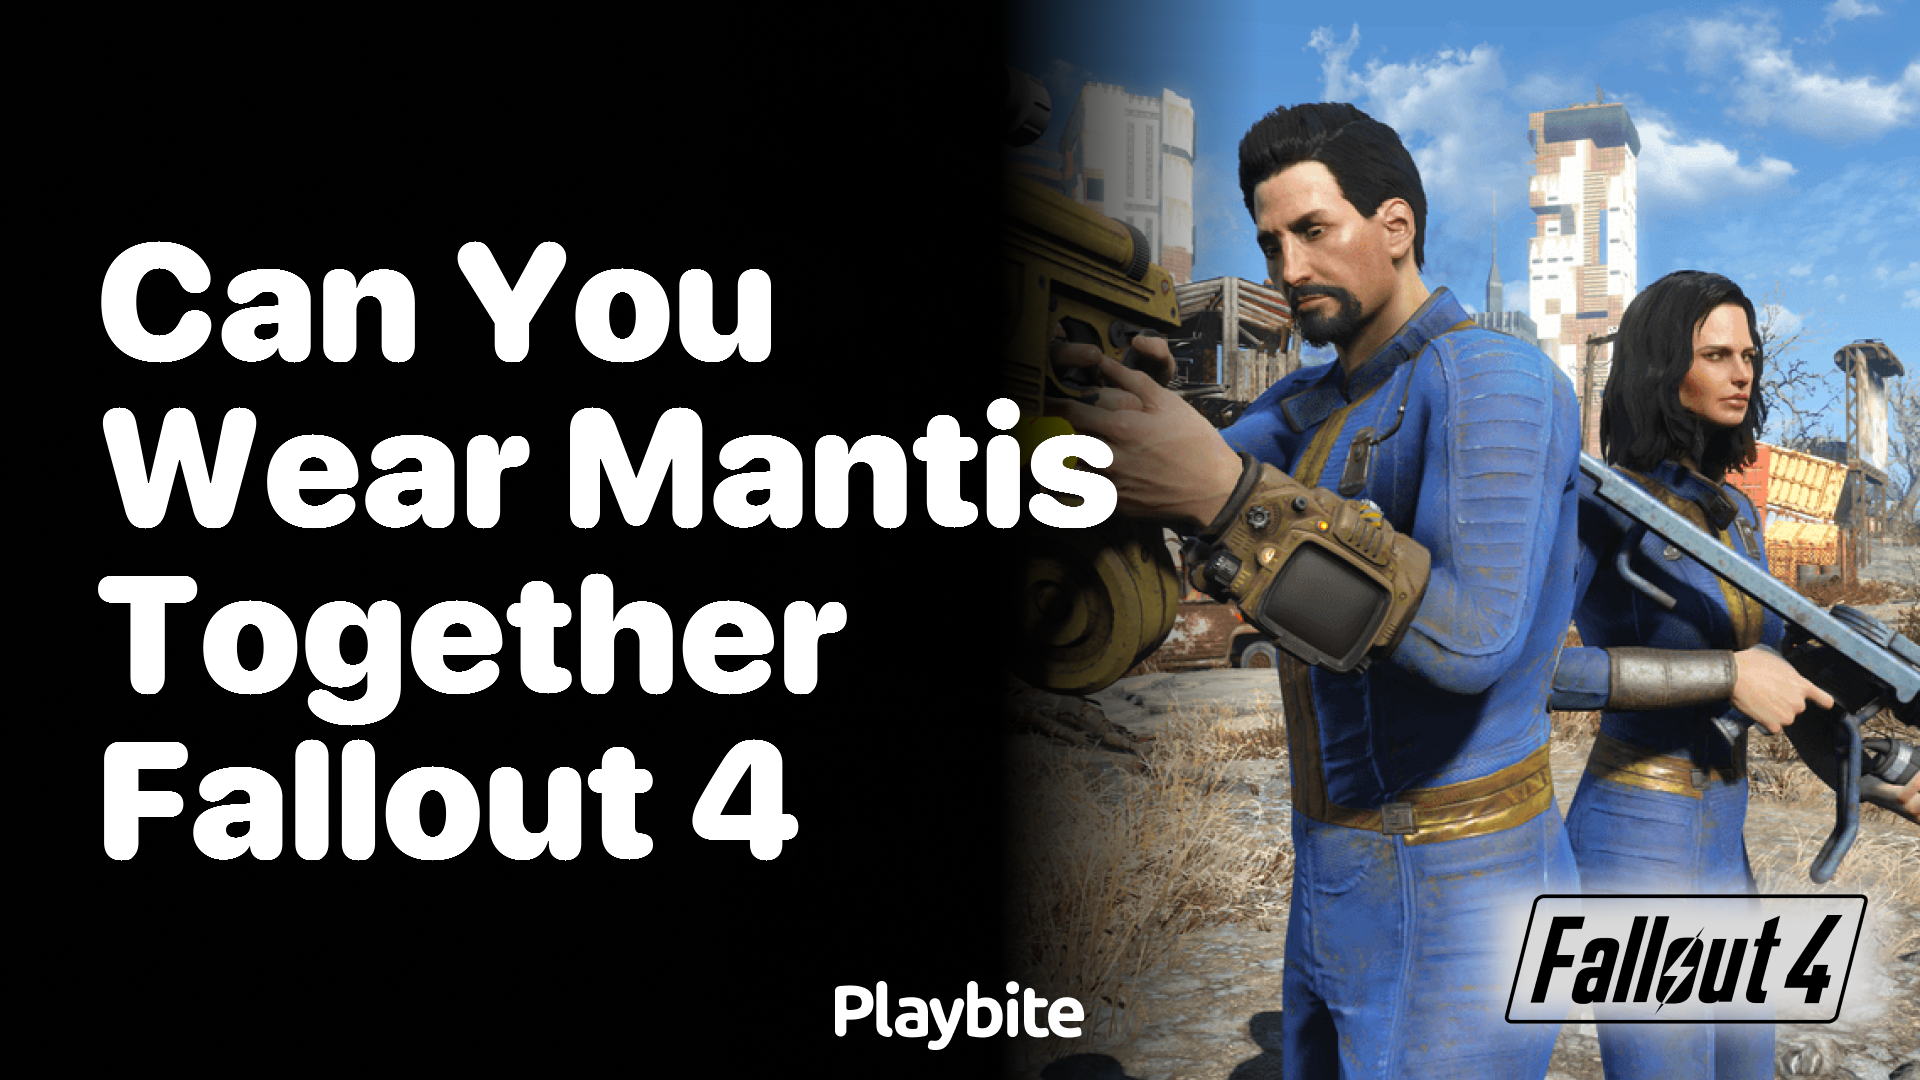 Can you wear Mantis armor pieces together in Fallout 4?